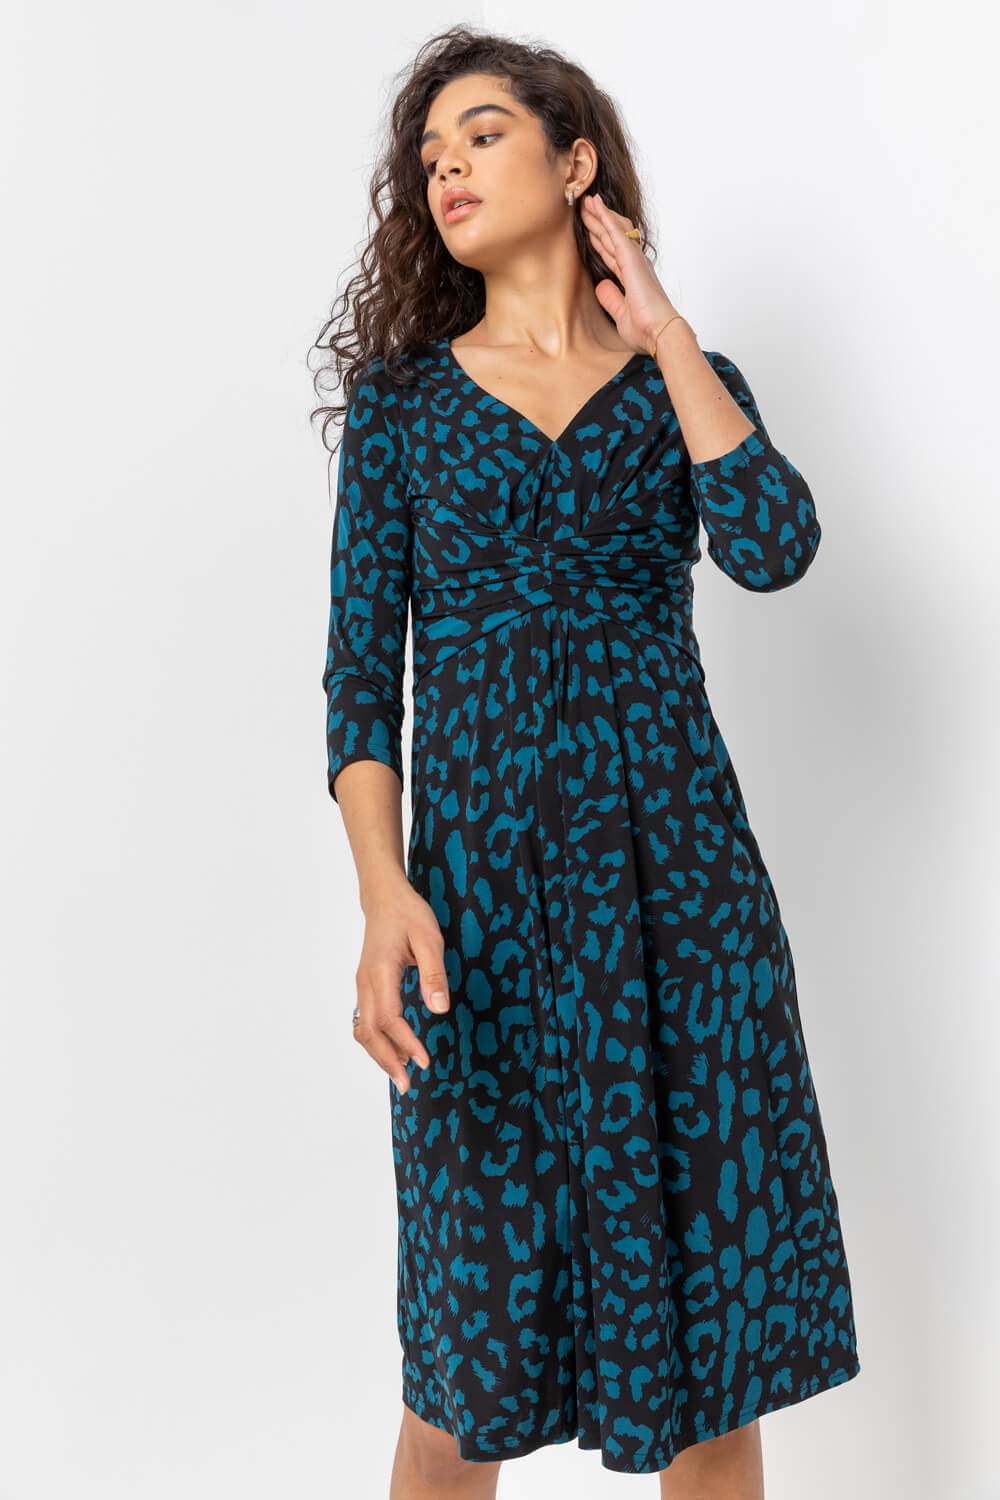 Teal Animal Print Fit And Flare Dress, Image 4 of 4